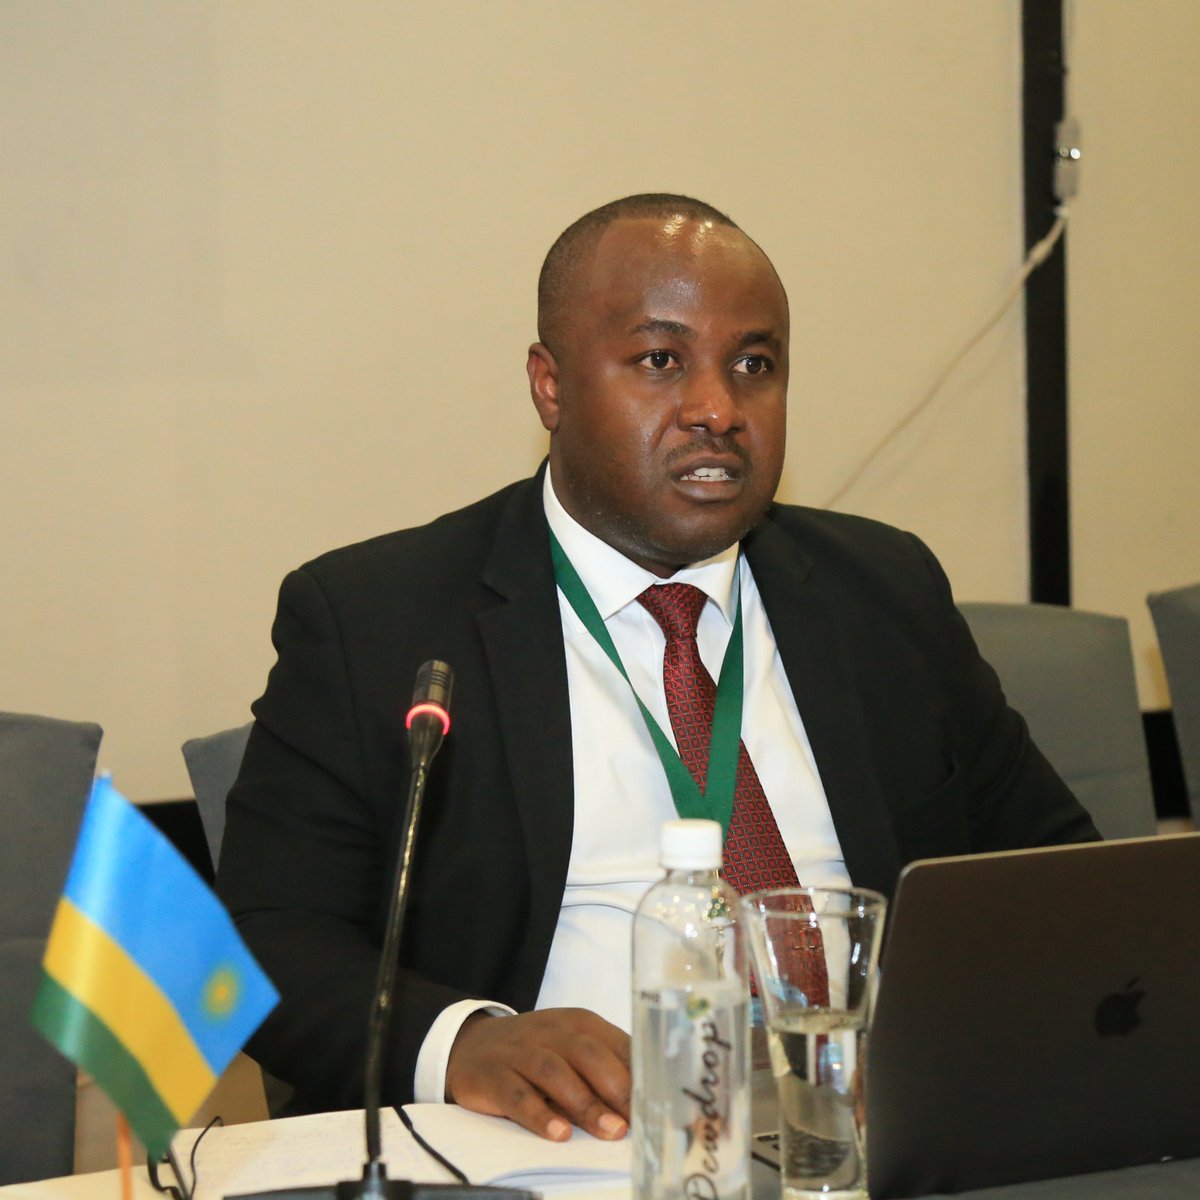 Consideration of the 3rd Periodic Report of #Rwanda🇷🇼: The report addresses all the issues raised by the committee during the consideration of the 2nd Periodic Report. It also includes progress in the implementation of domestic laws, policies and programs. #ACERWC43